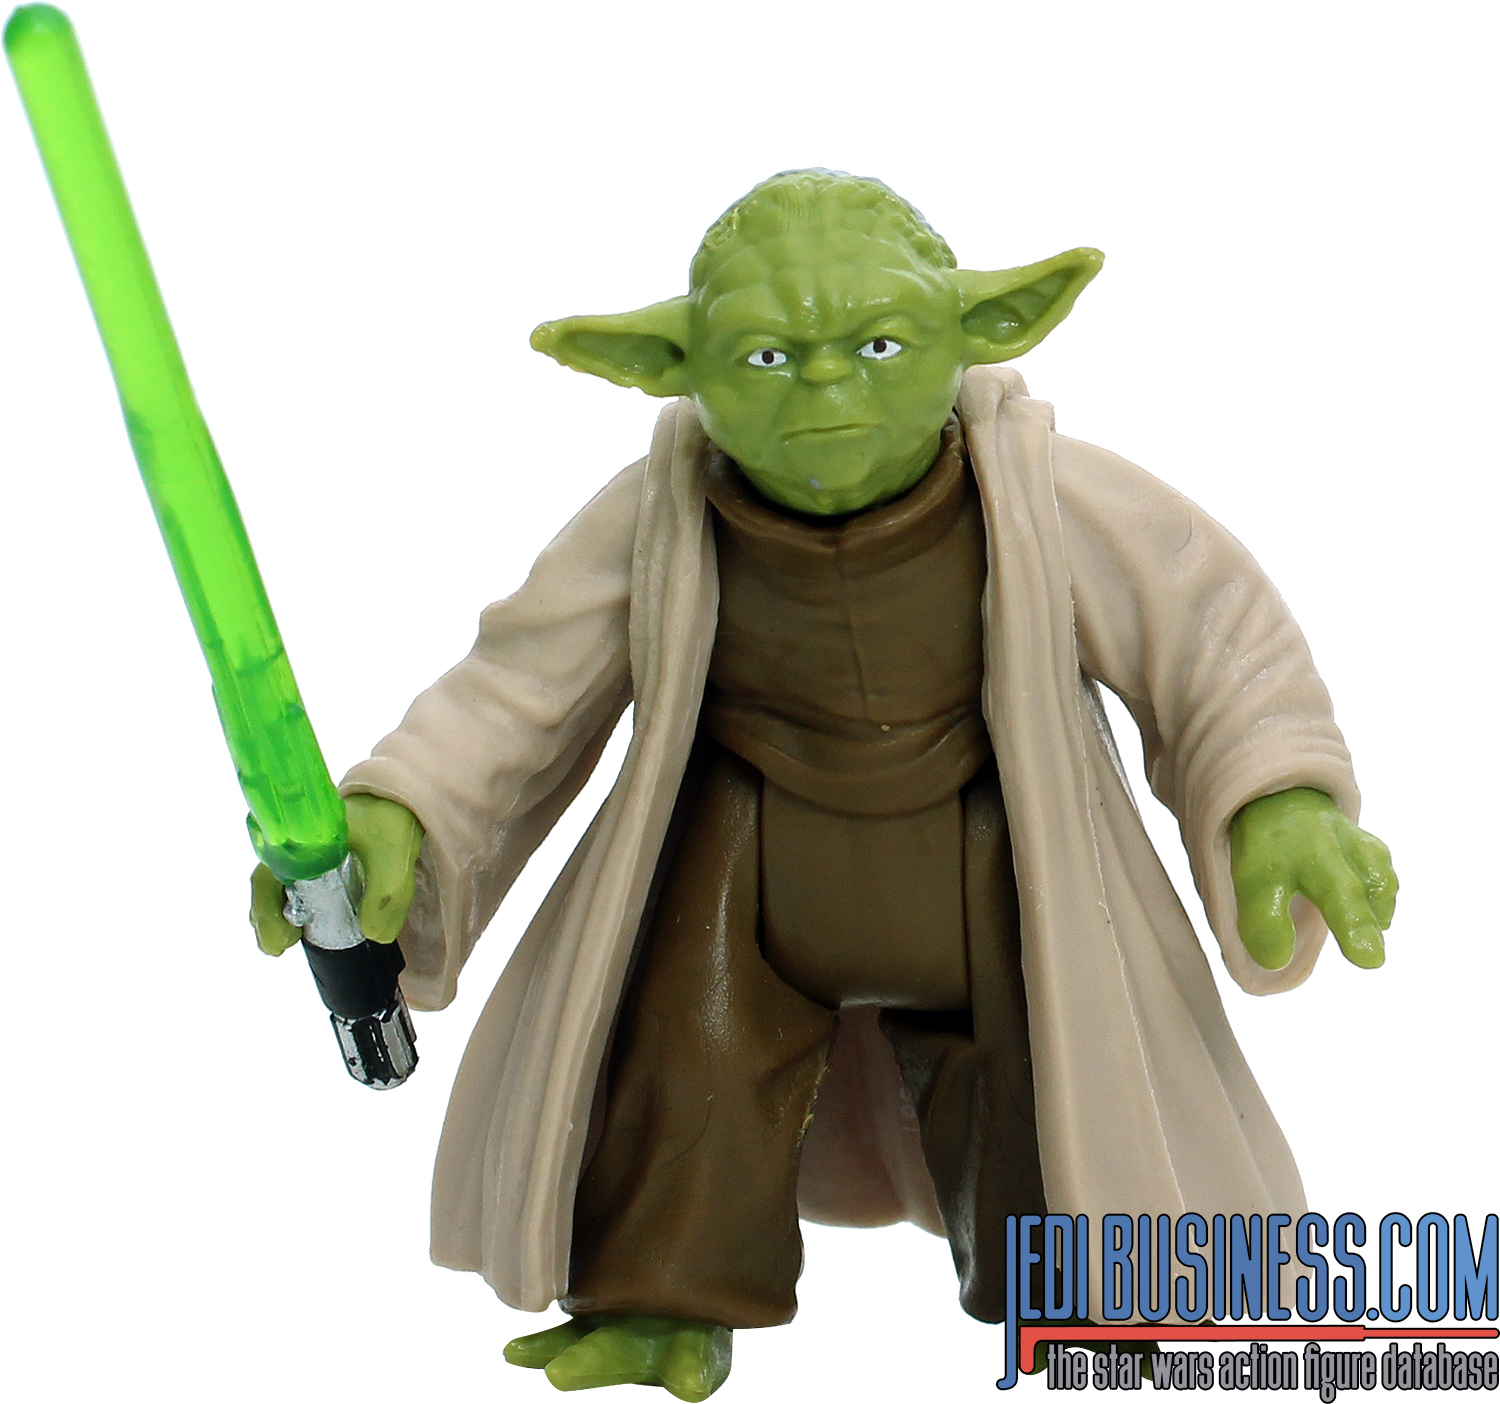 Yoda Era Of The Force 8-Pack